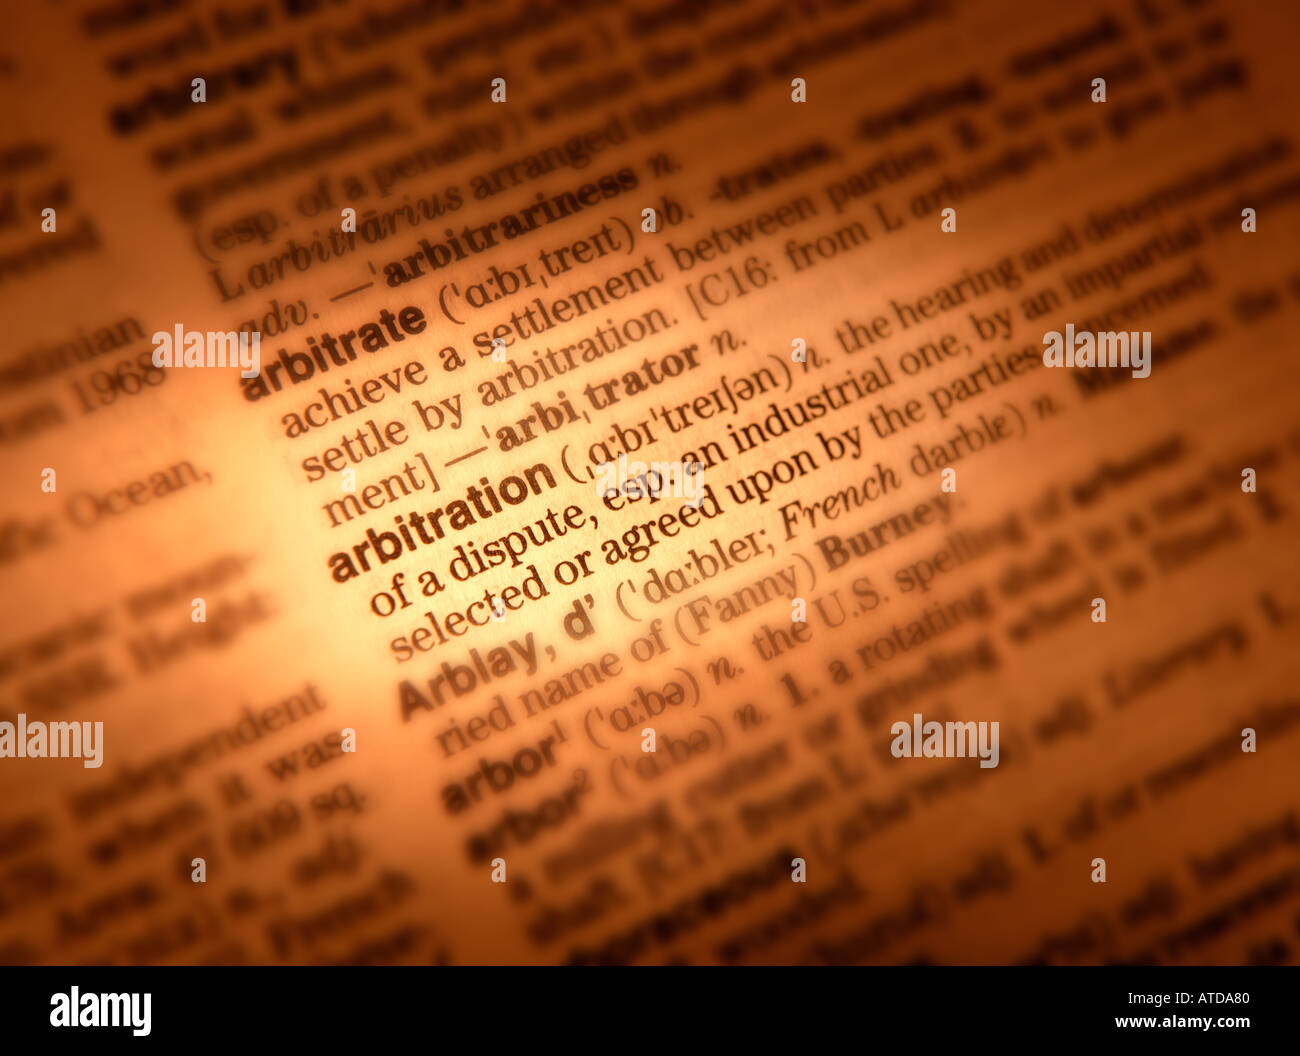 CLOSE UP OF DICTIONARY PAGE SHOWING DEFINITION OF THE WORD ARBITRATION Stock Photo